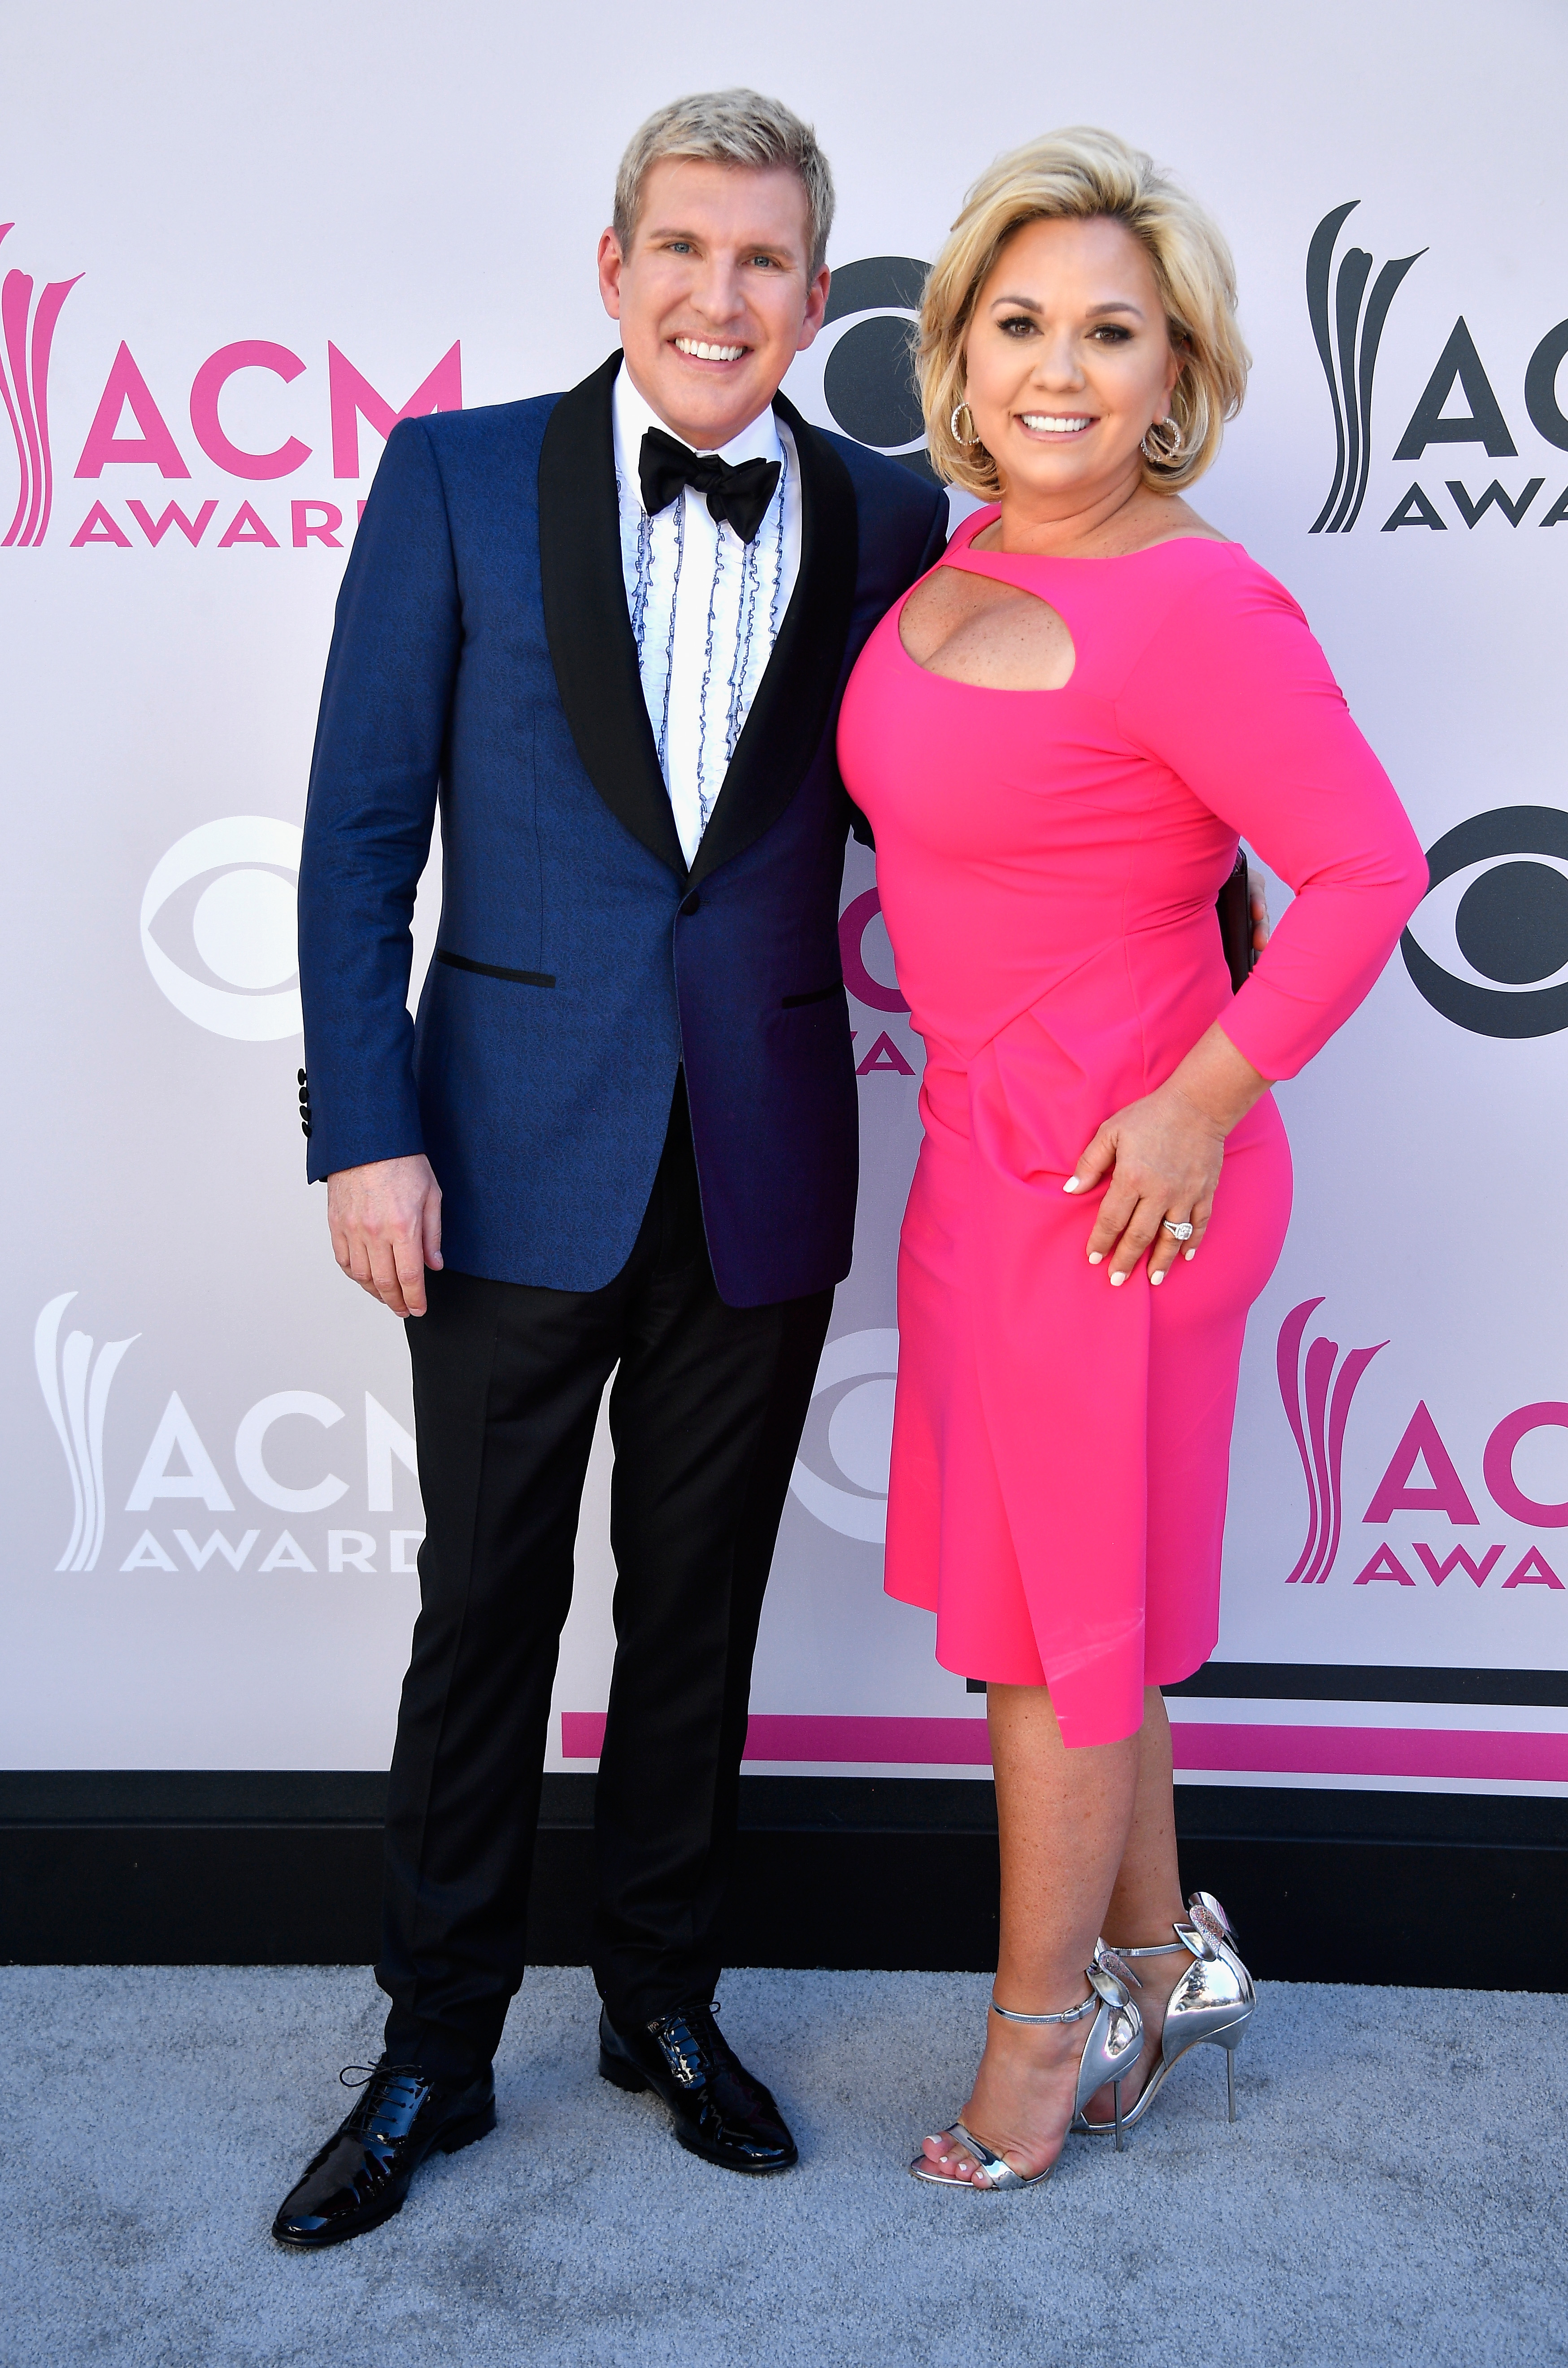 Todd and Julie Chrisley at the 52nd Academy Of Country Music Awards in Las Vegas, Nevada on April 2, 2017 | Source: Getty Images